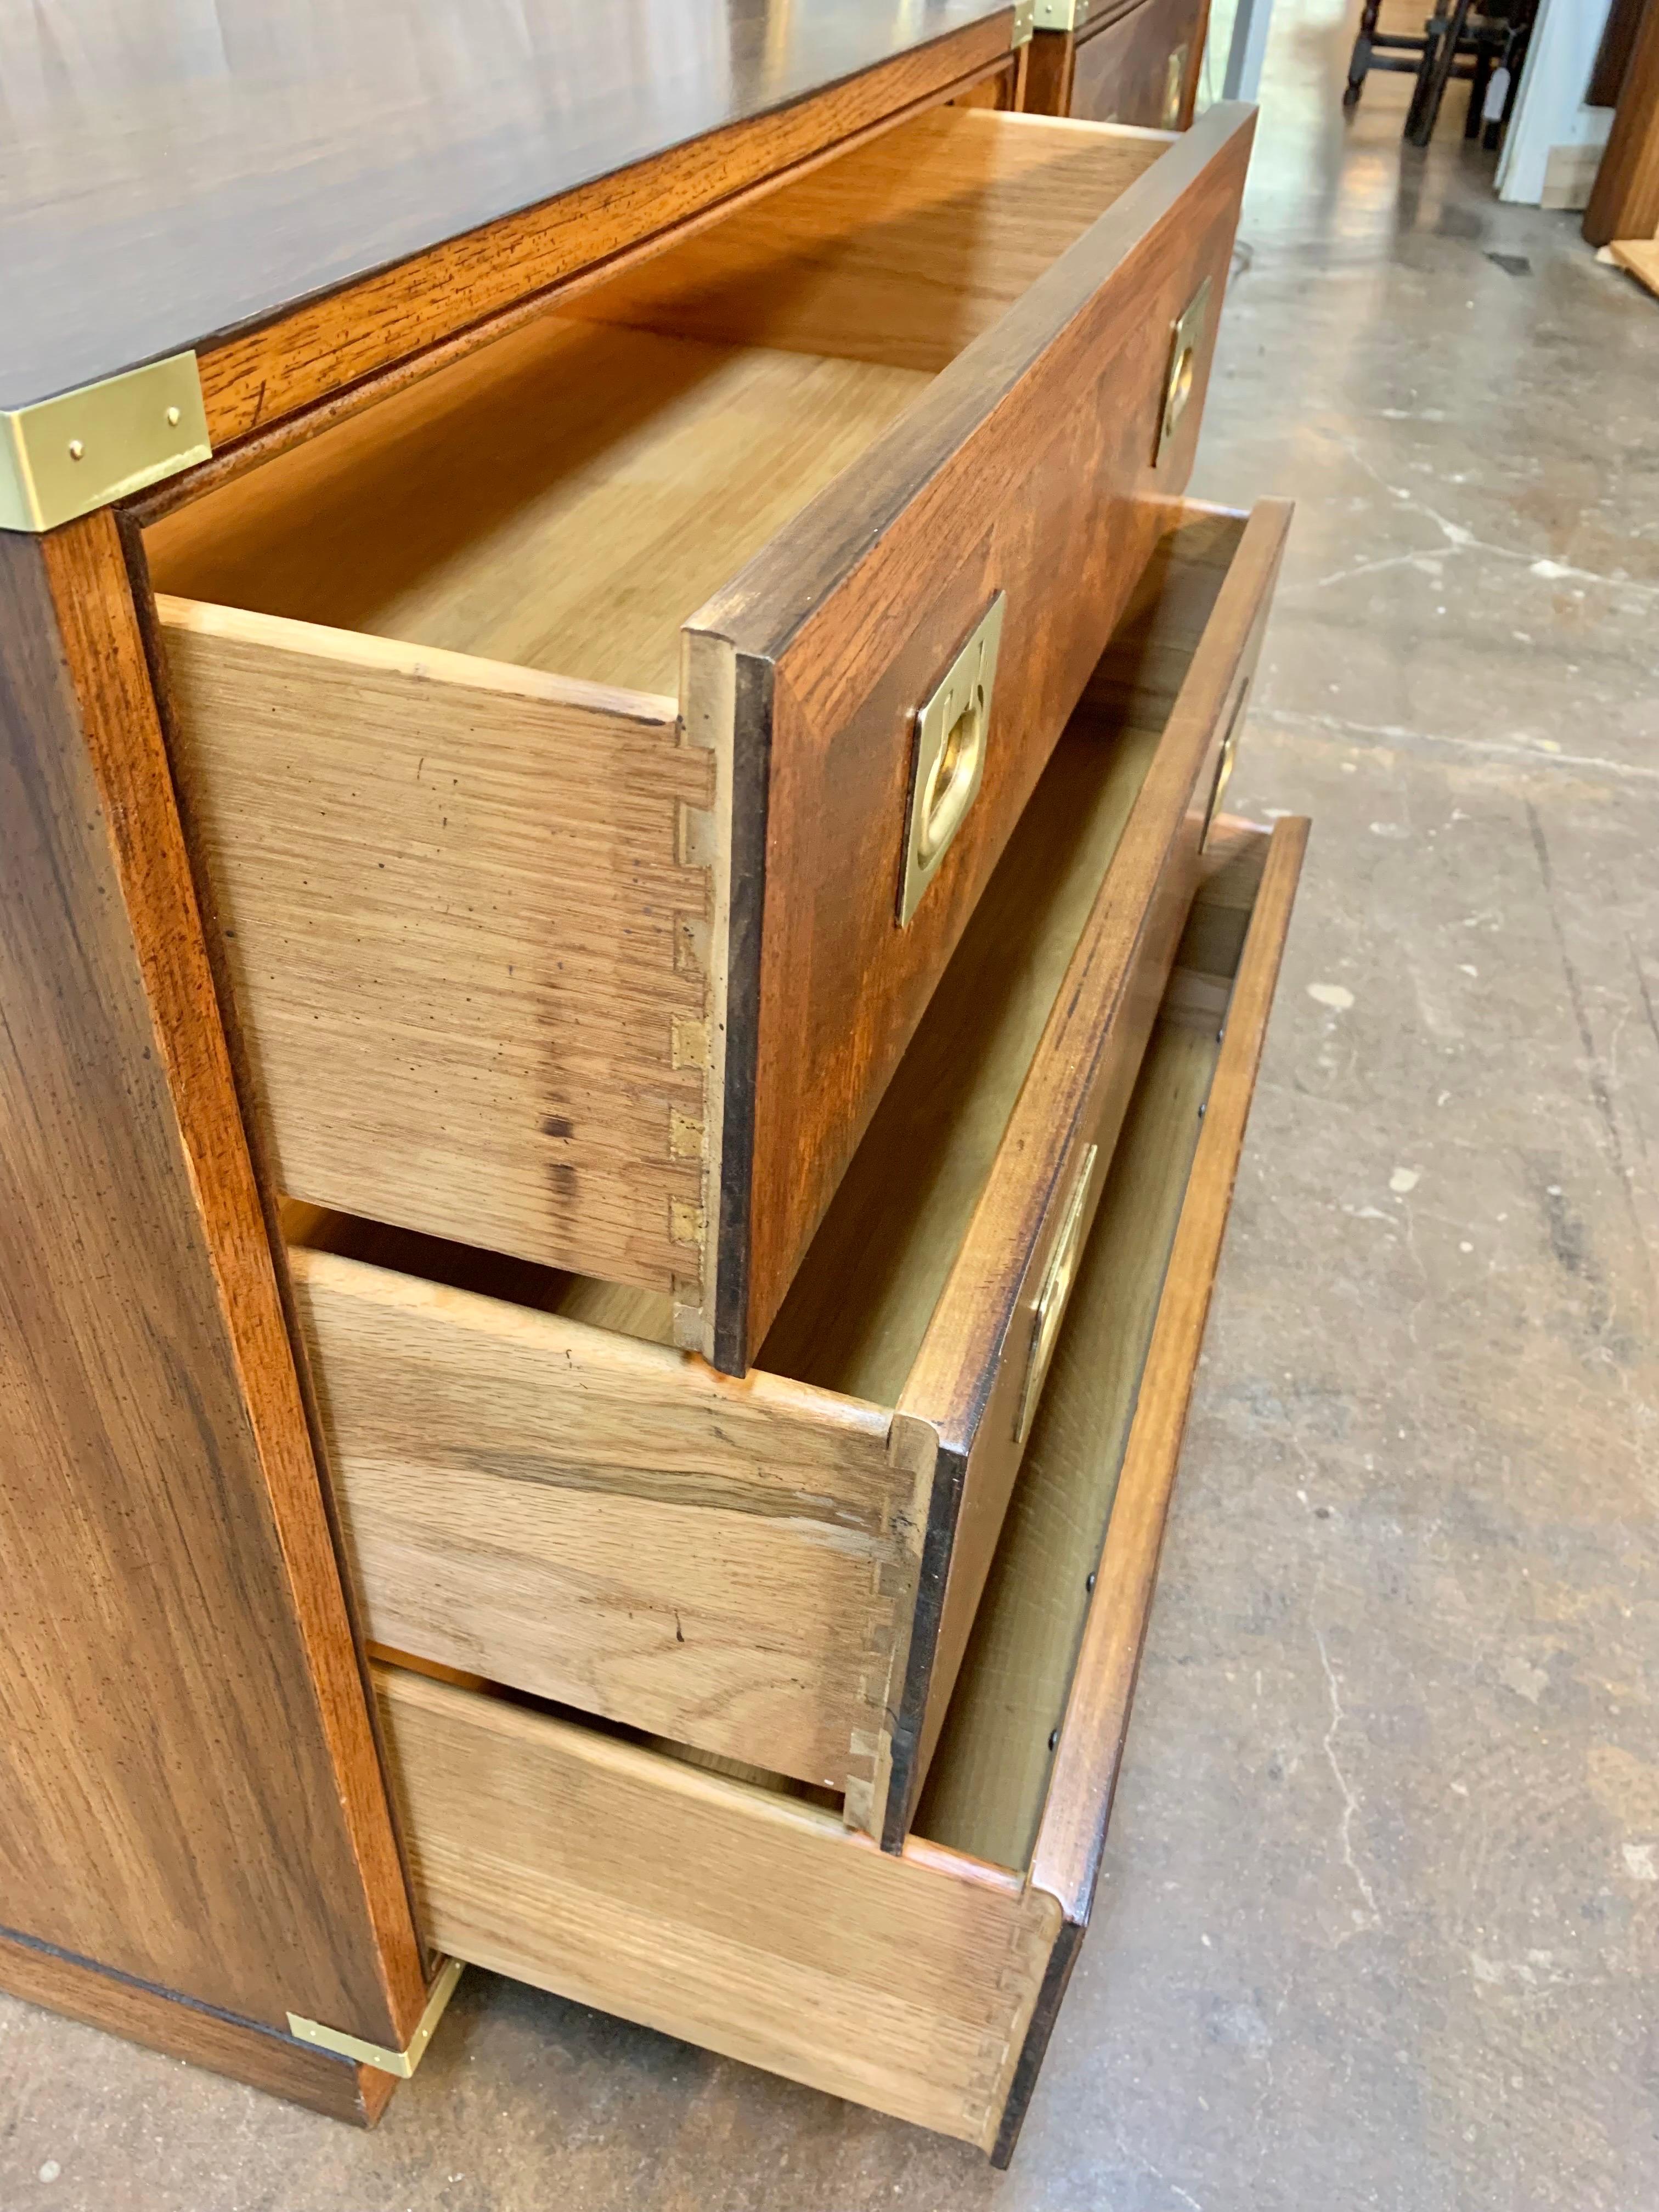 Mid 20th C. Walnut, Burlwood and Brass Campaign Style Bachelor Chests - a Pair 8